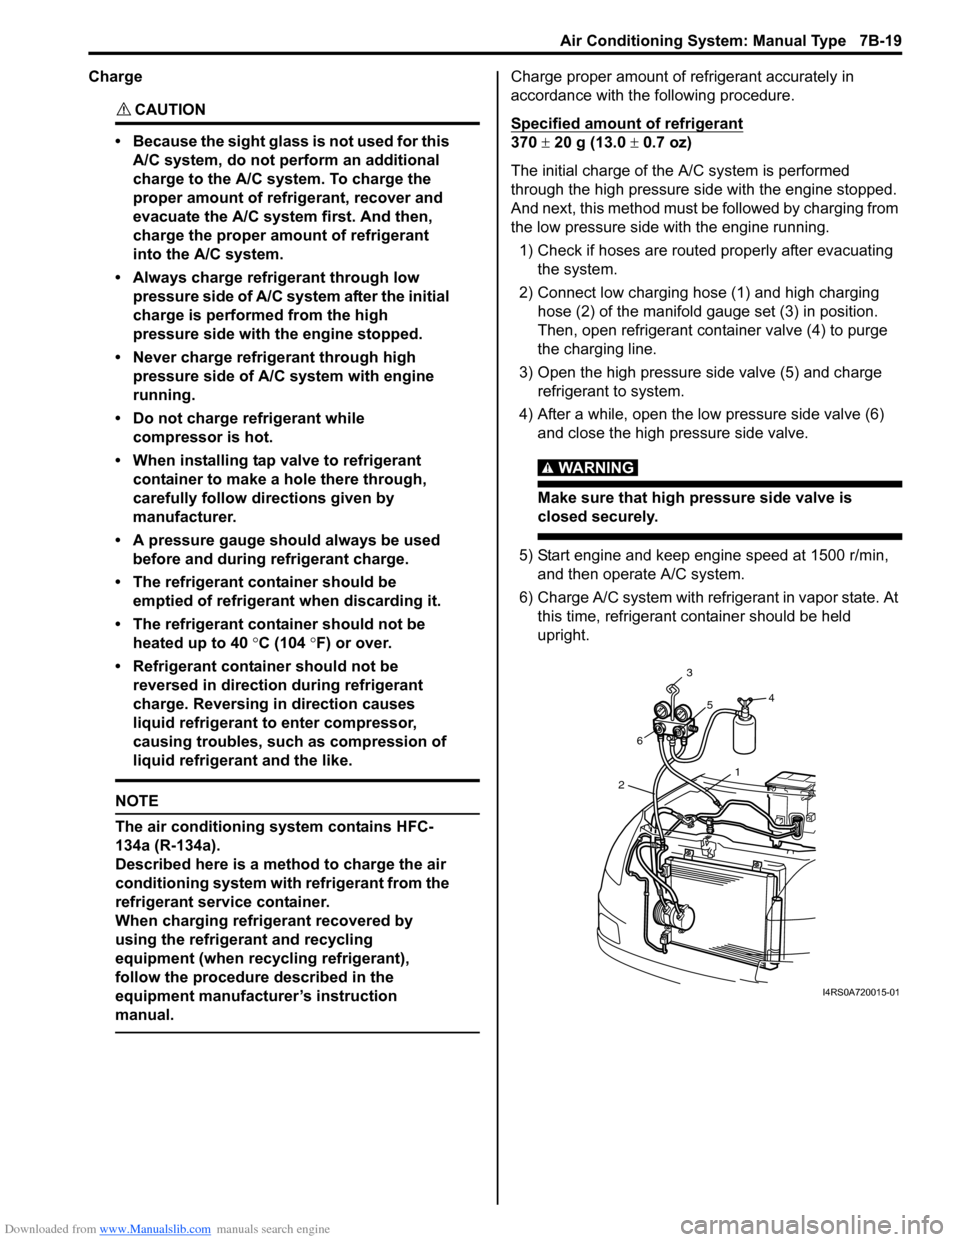 SUZUKI SWIFT 2008 2.G Service User Guide Downloaded from www.Manualslib.com manuals search engine Air Conditioning System: Manual Type 7B-19
Charge
CAUTION! 
• Because the sight glass is not used for this A/C system, do not perform an addi